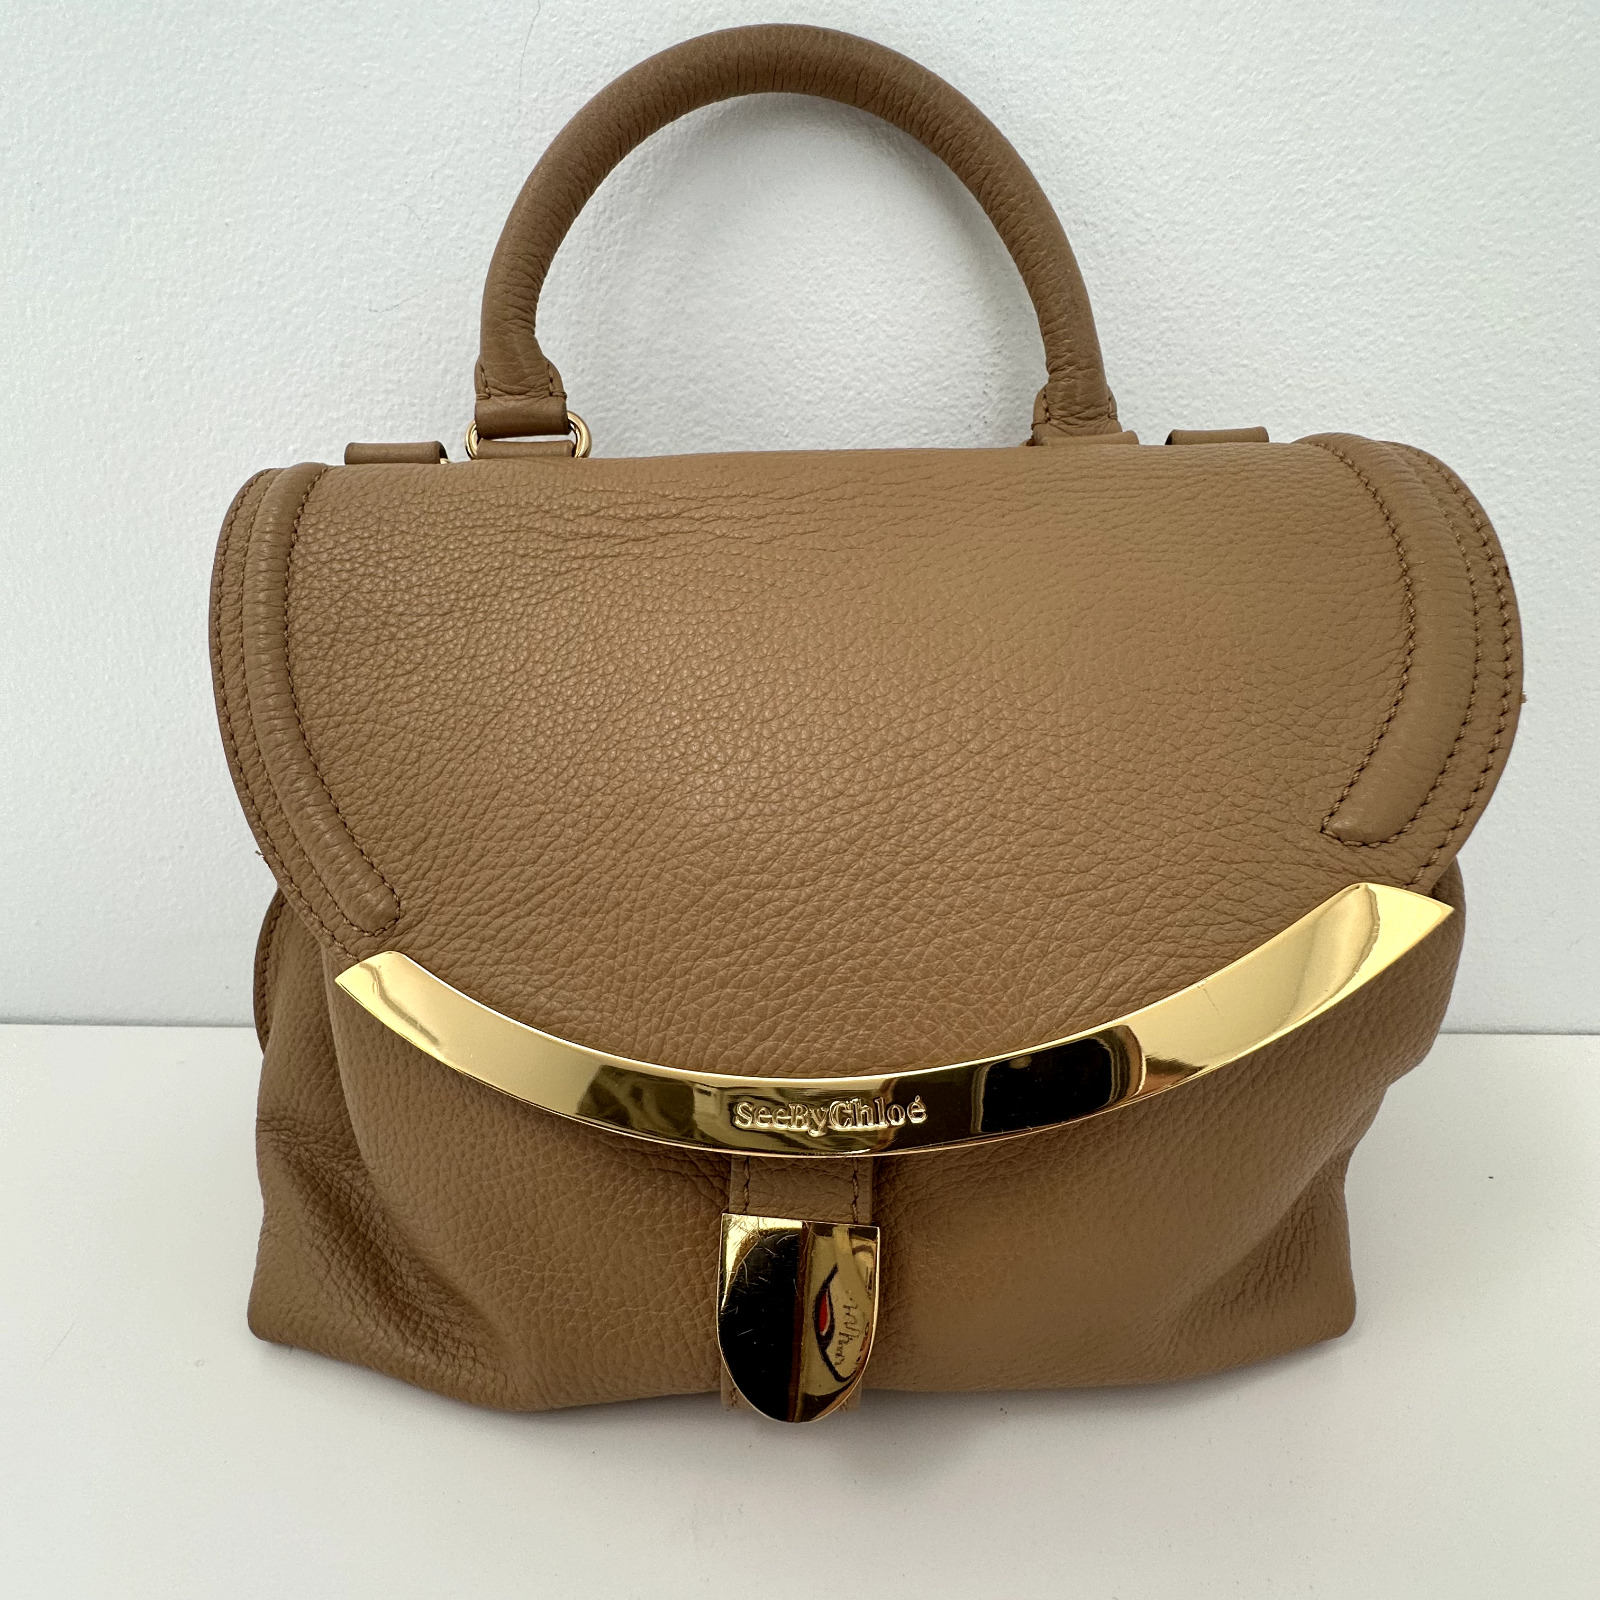 See by Chloe Purse Lizzie Small Brown Leather Handbag Bag NO SHOULDER STRAP